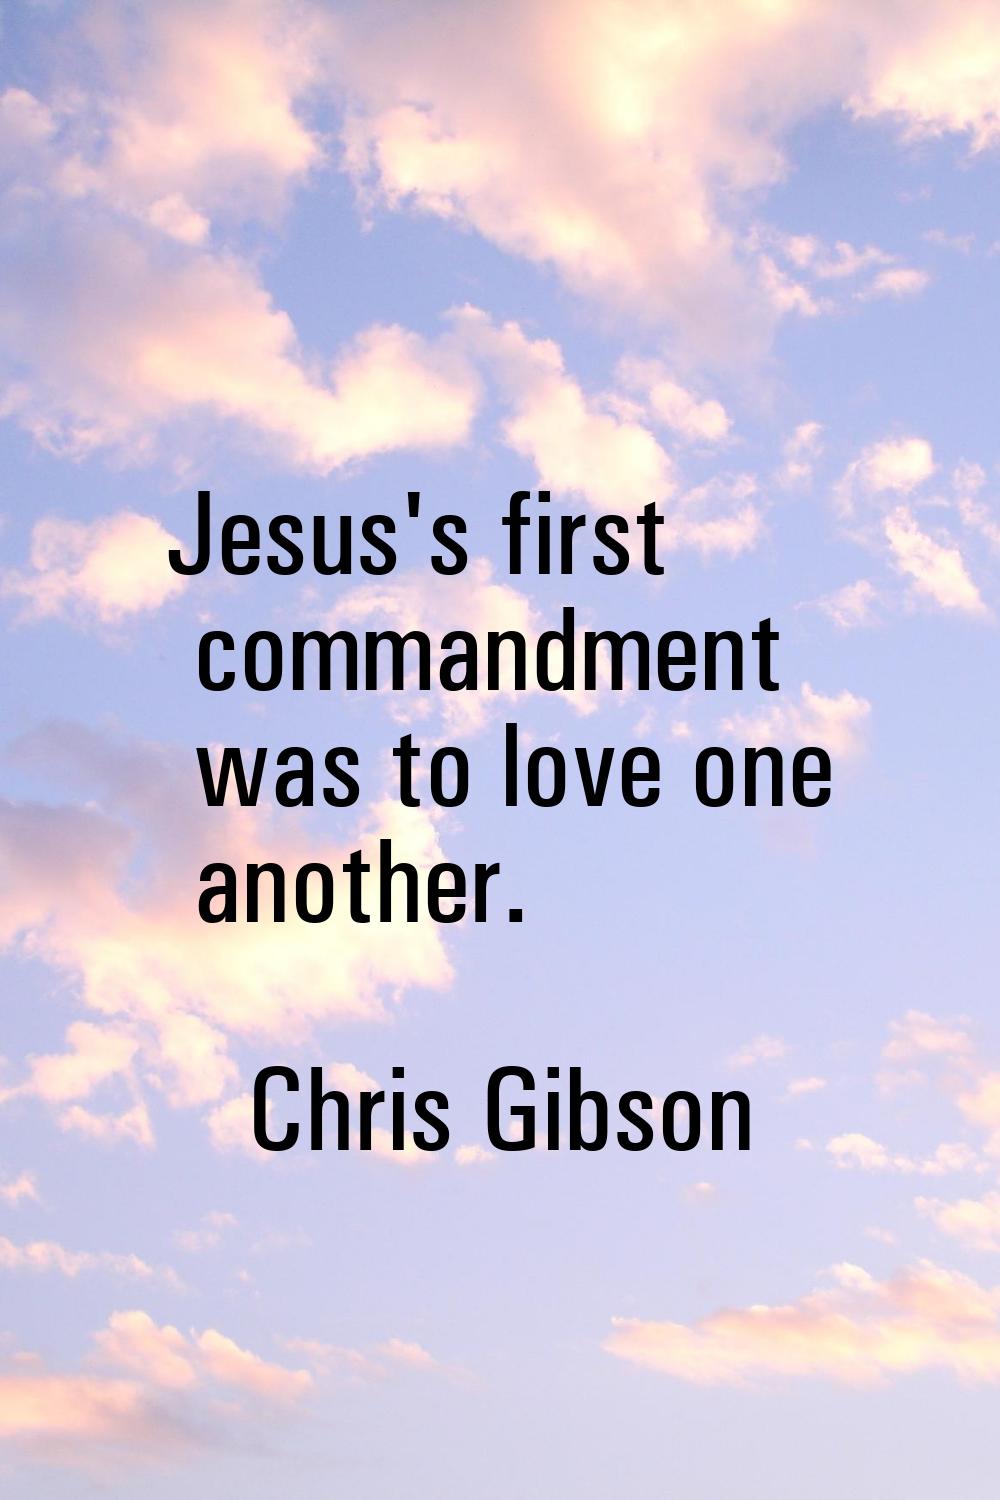 Jesus's first commandment was to love one another.